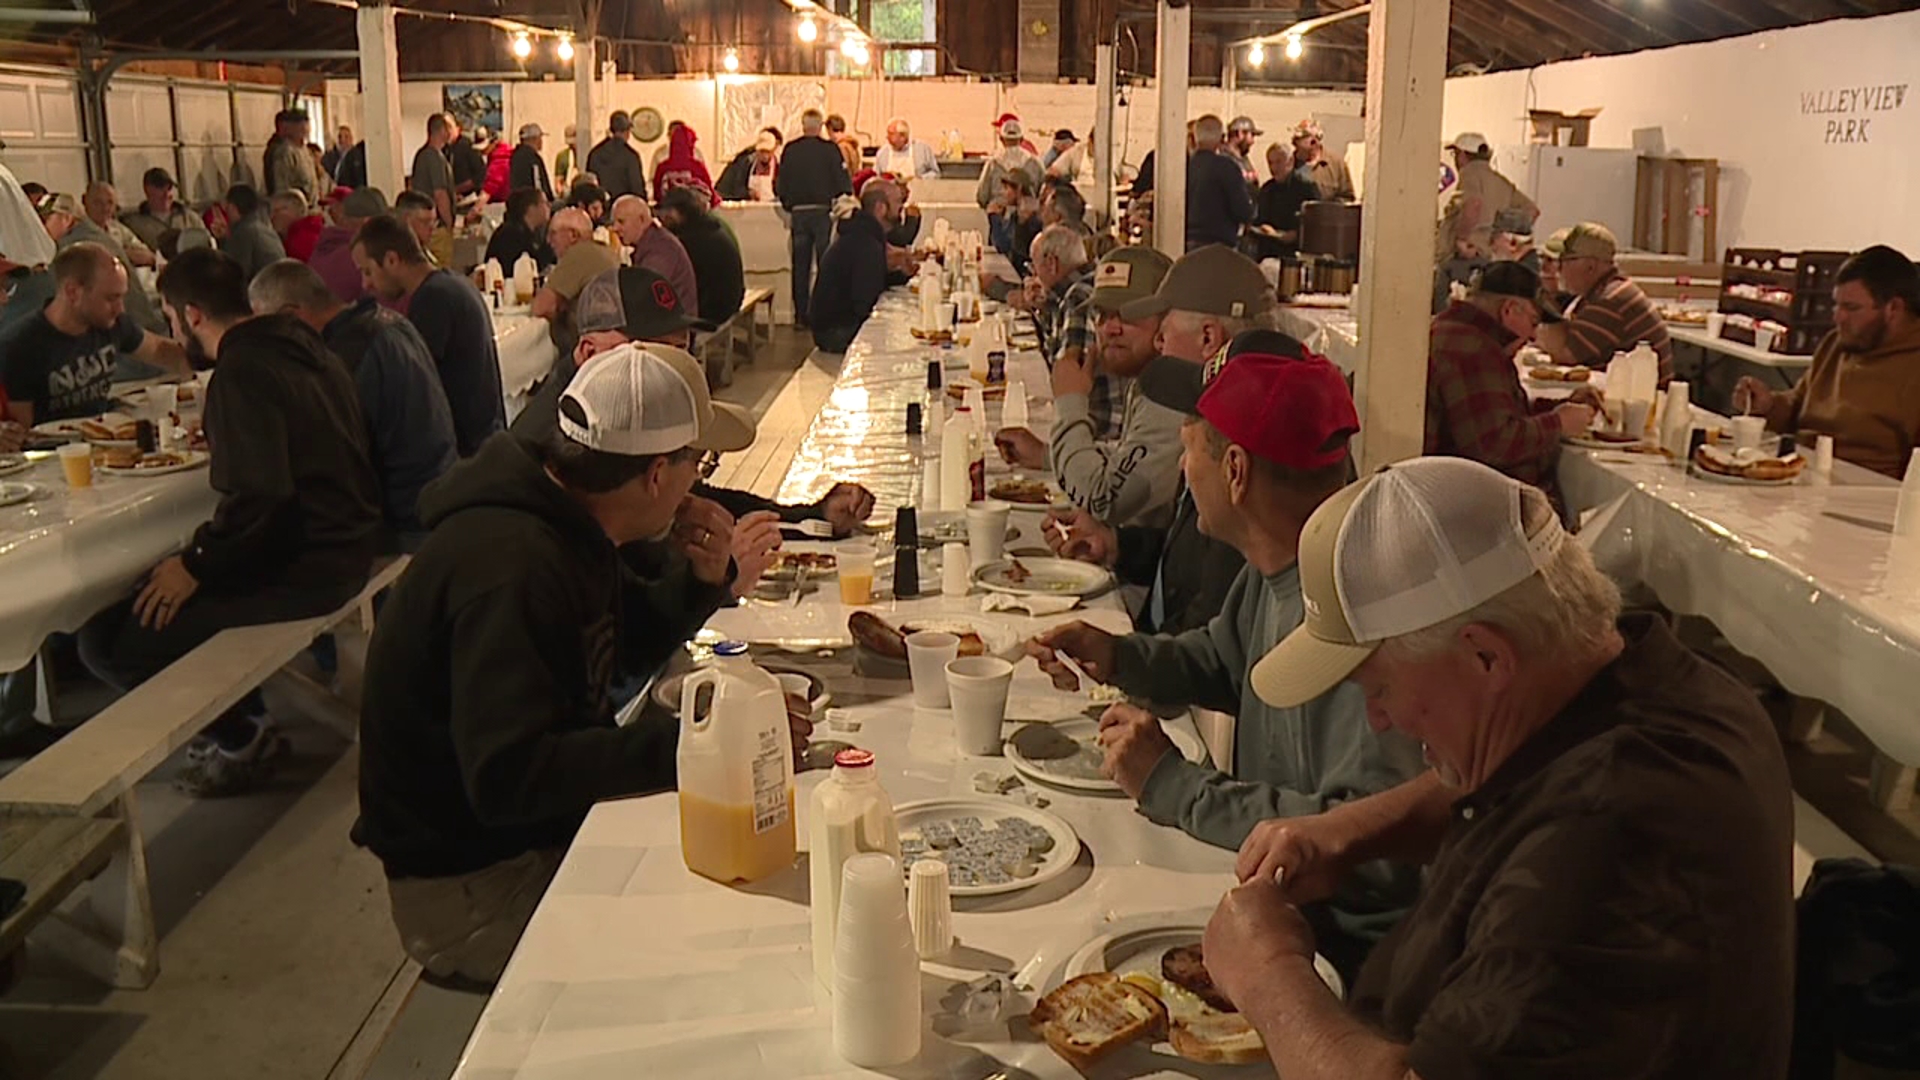 There was a big turnout for a special Father's Day breakfast in Schuylkill County on Sunday morning.